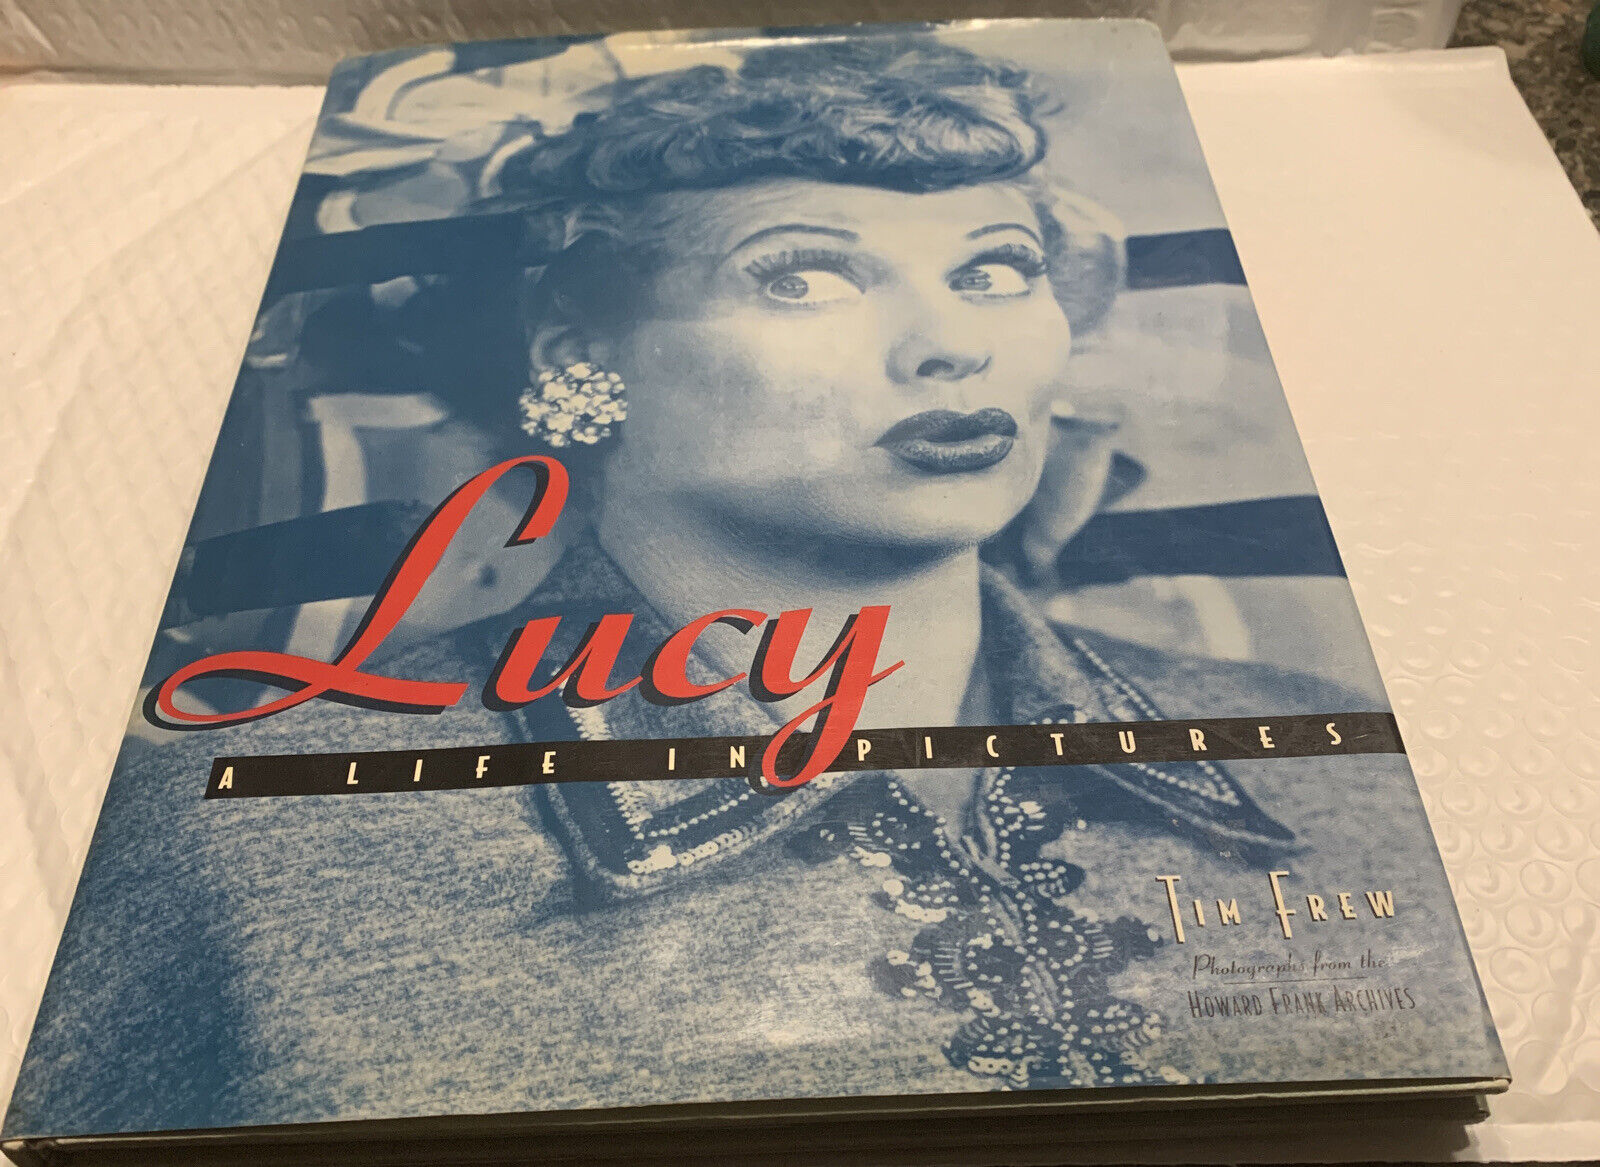 I Love Lucy A Life In Pictures book by Tim Frew